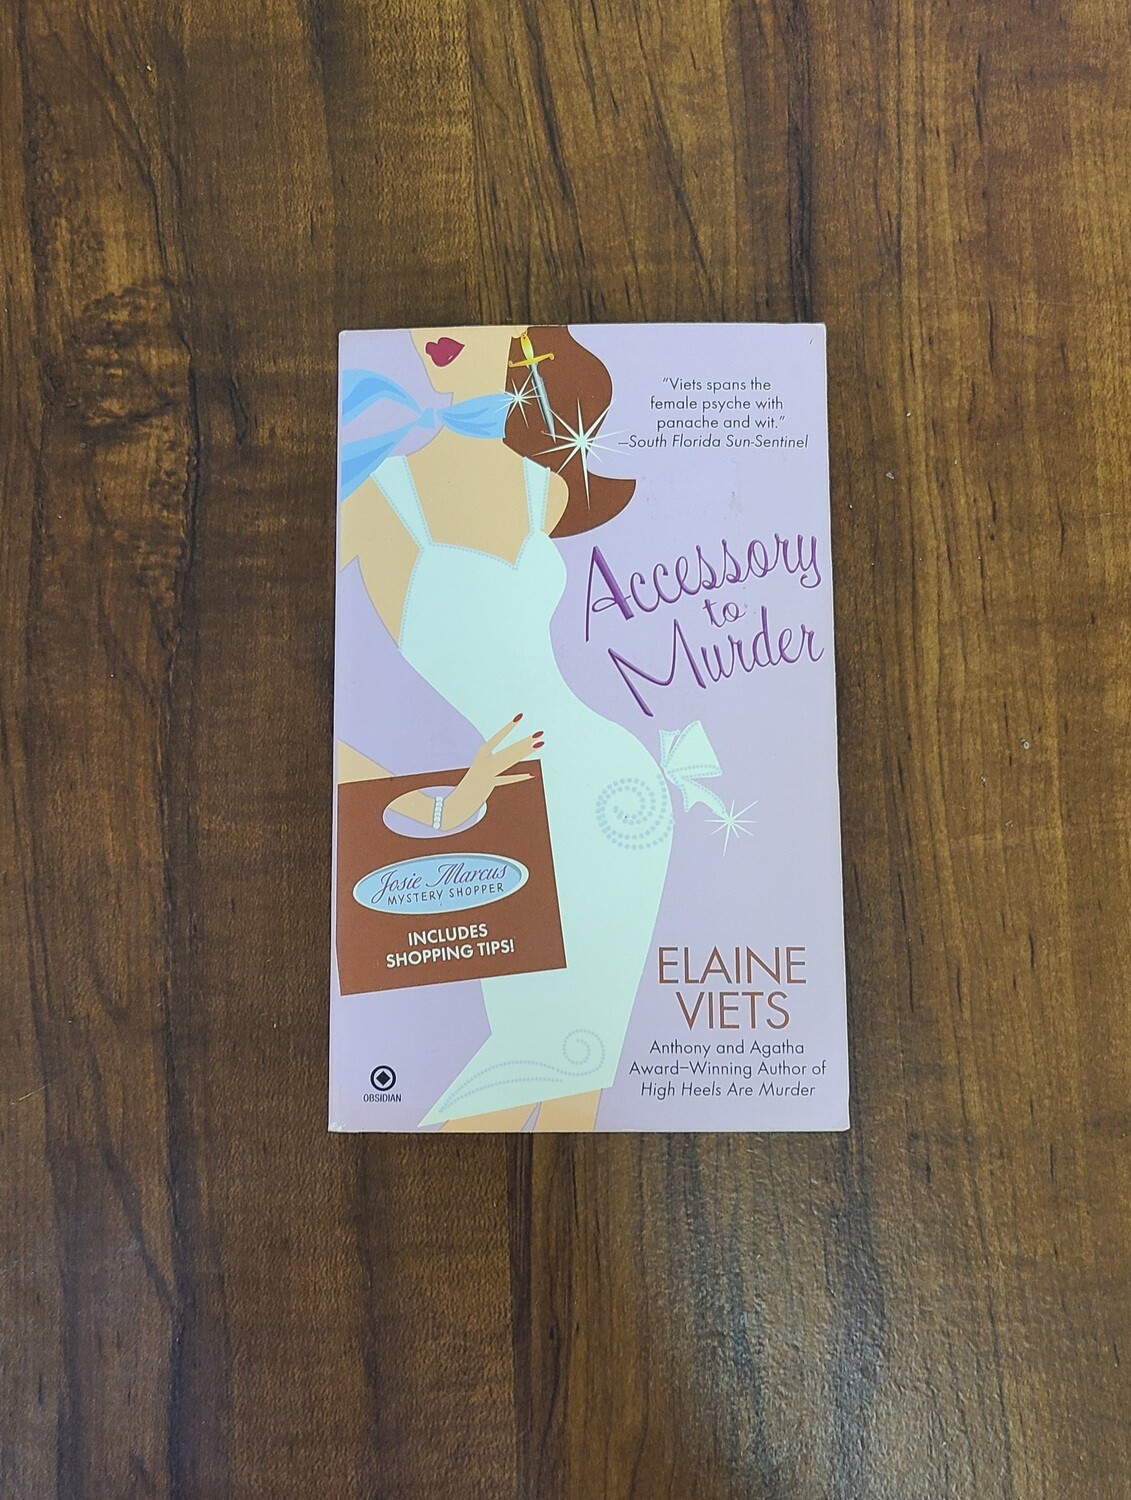 Accessory to Murder by Elaine Viets